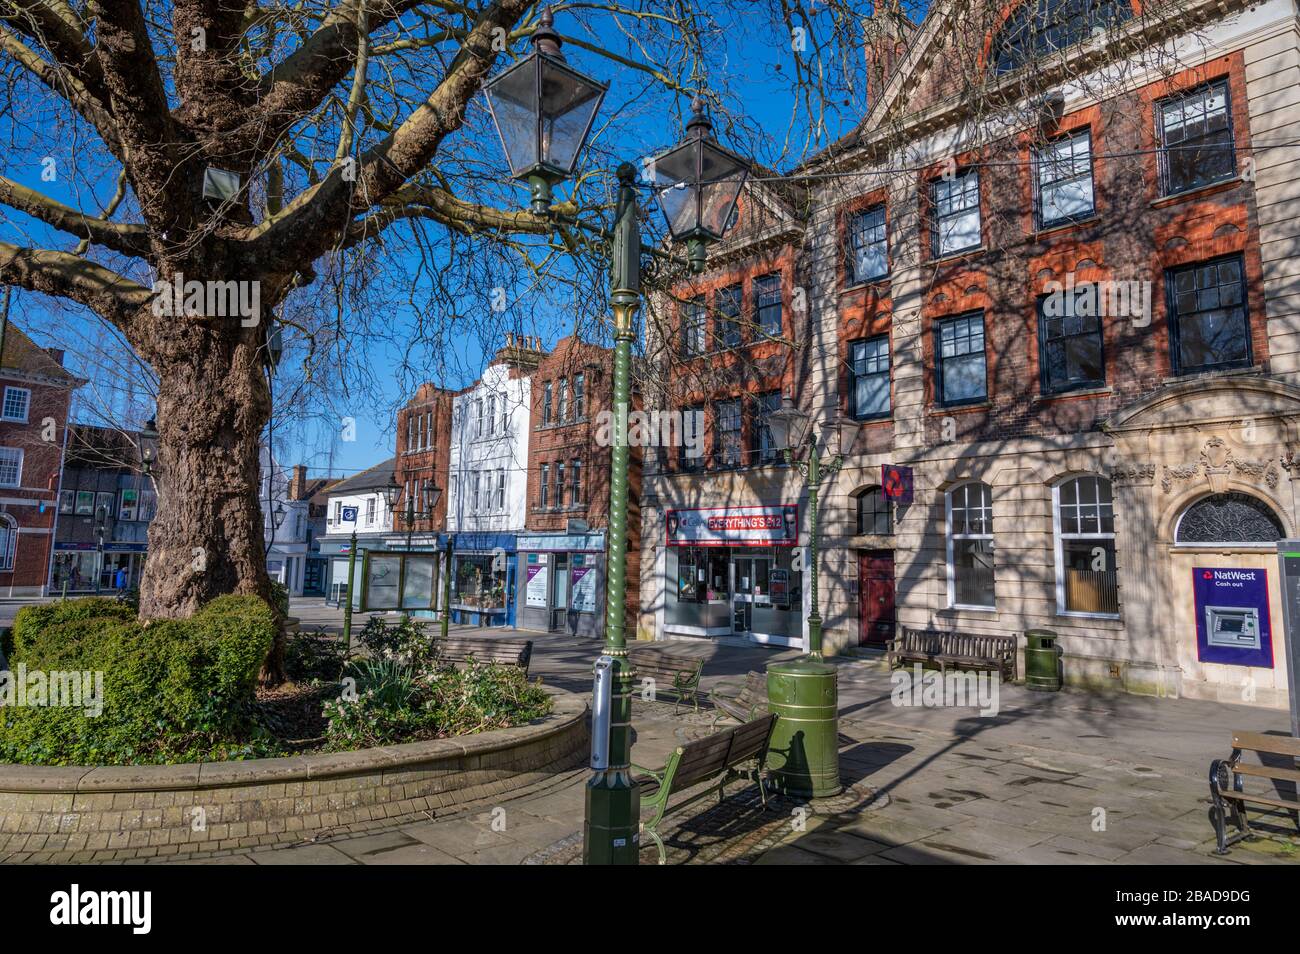 Carfax in Horsham, West Sussex, with NatWest bank and shops in bright morning winter sunshine. Stock Photo